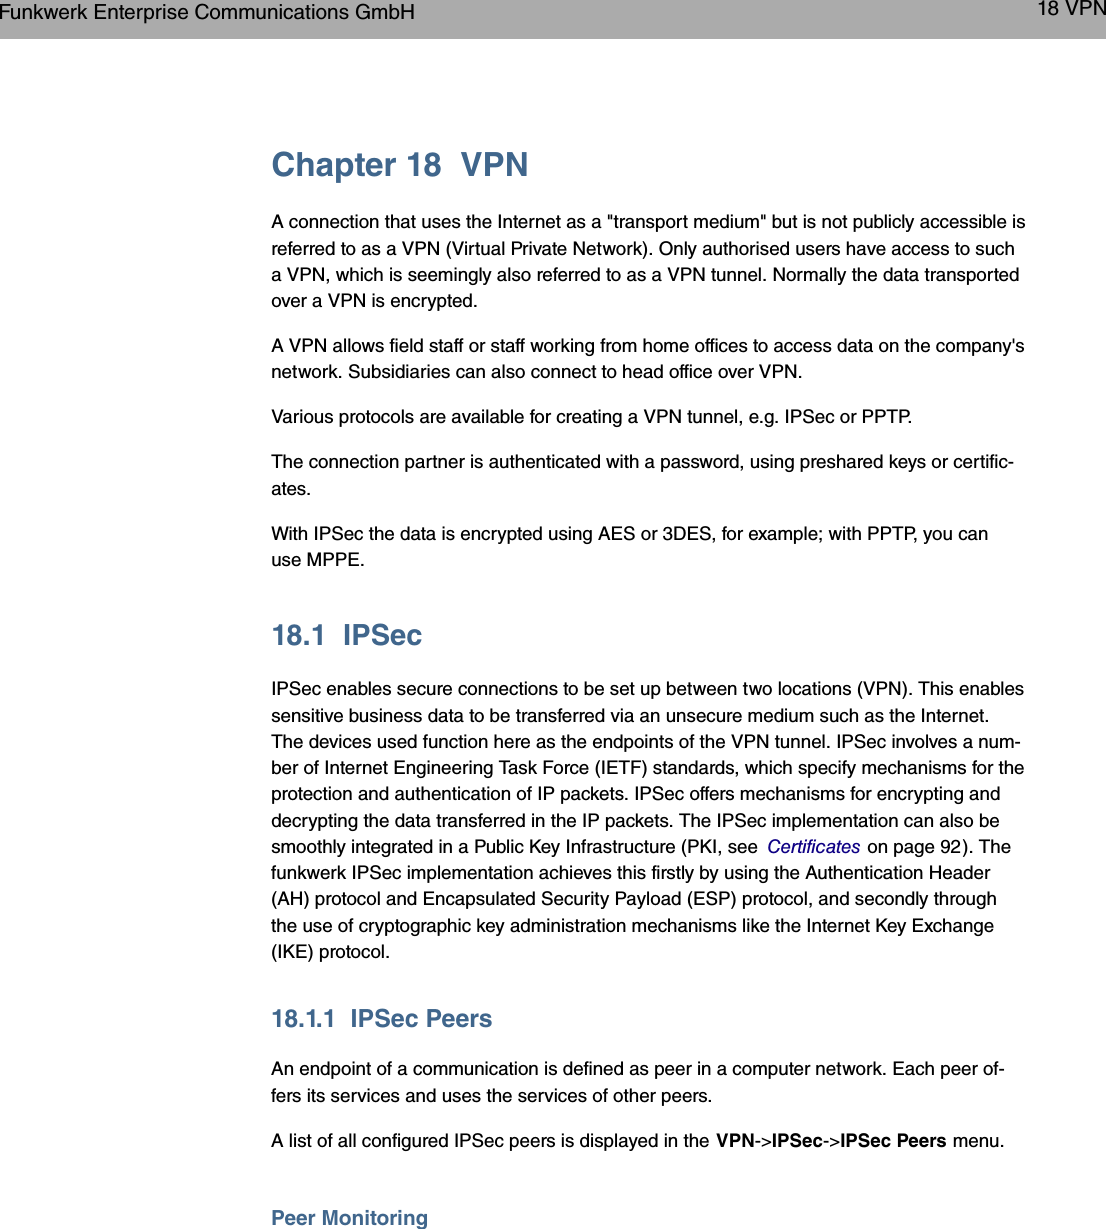 Chapter 18 VPNA connection that uses the Internet as a &quot;transport medium&quot; but is not publicly accessible isreferred to as a VPN (Virtual Private Network). Only authorised users have access to sucha VPN, which is seemingly also referred to as a VPN tunnel. Normally the data transportedover a VPN is encrypted.A VPN allows field staff or staff working from home offices to access data on the company&apos;snetwork. Subsidiaries can also connect to head office over VPN.Various protocols are available for creating a VPN tunnel, e.g. IPSec or PPTP.The connection partner is authenticated with a password, using preshared keys or certific-ates.With IPSec the data is encrypted using AES or 3DES, for example; with PPTP, you canuse MPPE.18.1 IPSecIPSec enables secure connections to be set up between two locations (VPN). This enablessensitive business data to be transferred via an unsecure medium such as the Internet.The devices used function here as the endpoints of the VPN tunnel. IPSec involves a num-ber of Internet Engineering Task Force (IETF) standards, which specify mechanisms for theprotection and authentication of IP packets. IPSec offers mechanisms for encrypting anddecrypting the data transferred in the IP packets. The IPSec implementation can also besmoothly integrated in a Public Key Infrastructure (PKI, see Certificates on page 92). Thefunkwerk IPSec implementation achieves this firstly by using the Authentication Header(AH) protocol and Encapsulated Security Payload (ESP) protocol, and secondly throughthe use of cryptographic key administration mechanisms like the Internet Key Exchange(IKE) protocol.18.1.1 IPSec PeersAn endpoint of a communication is defined as peer in a computer network. Each peer of-fers its services and uses the services of other peers.A list of all configured IPSec peers is displayed in the VPN-&gt;IPSec-&gt;IPSec Peers menu.Peer MonitoringFunkwerk Enterprise Communications GmbH 18 VPNbintec WLAN and Industrial WLAN 229